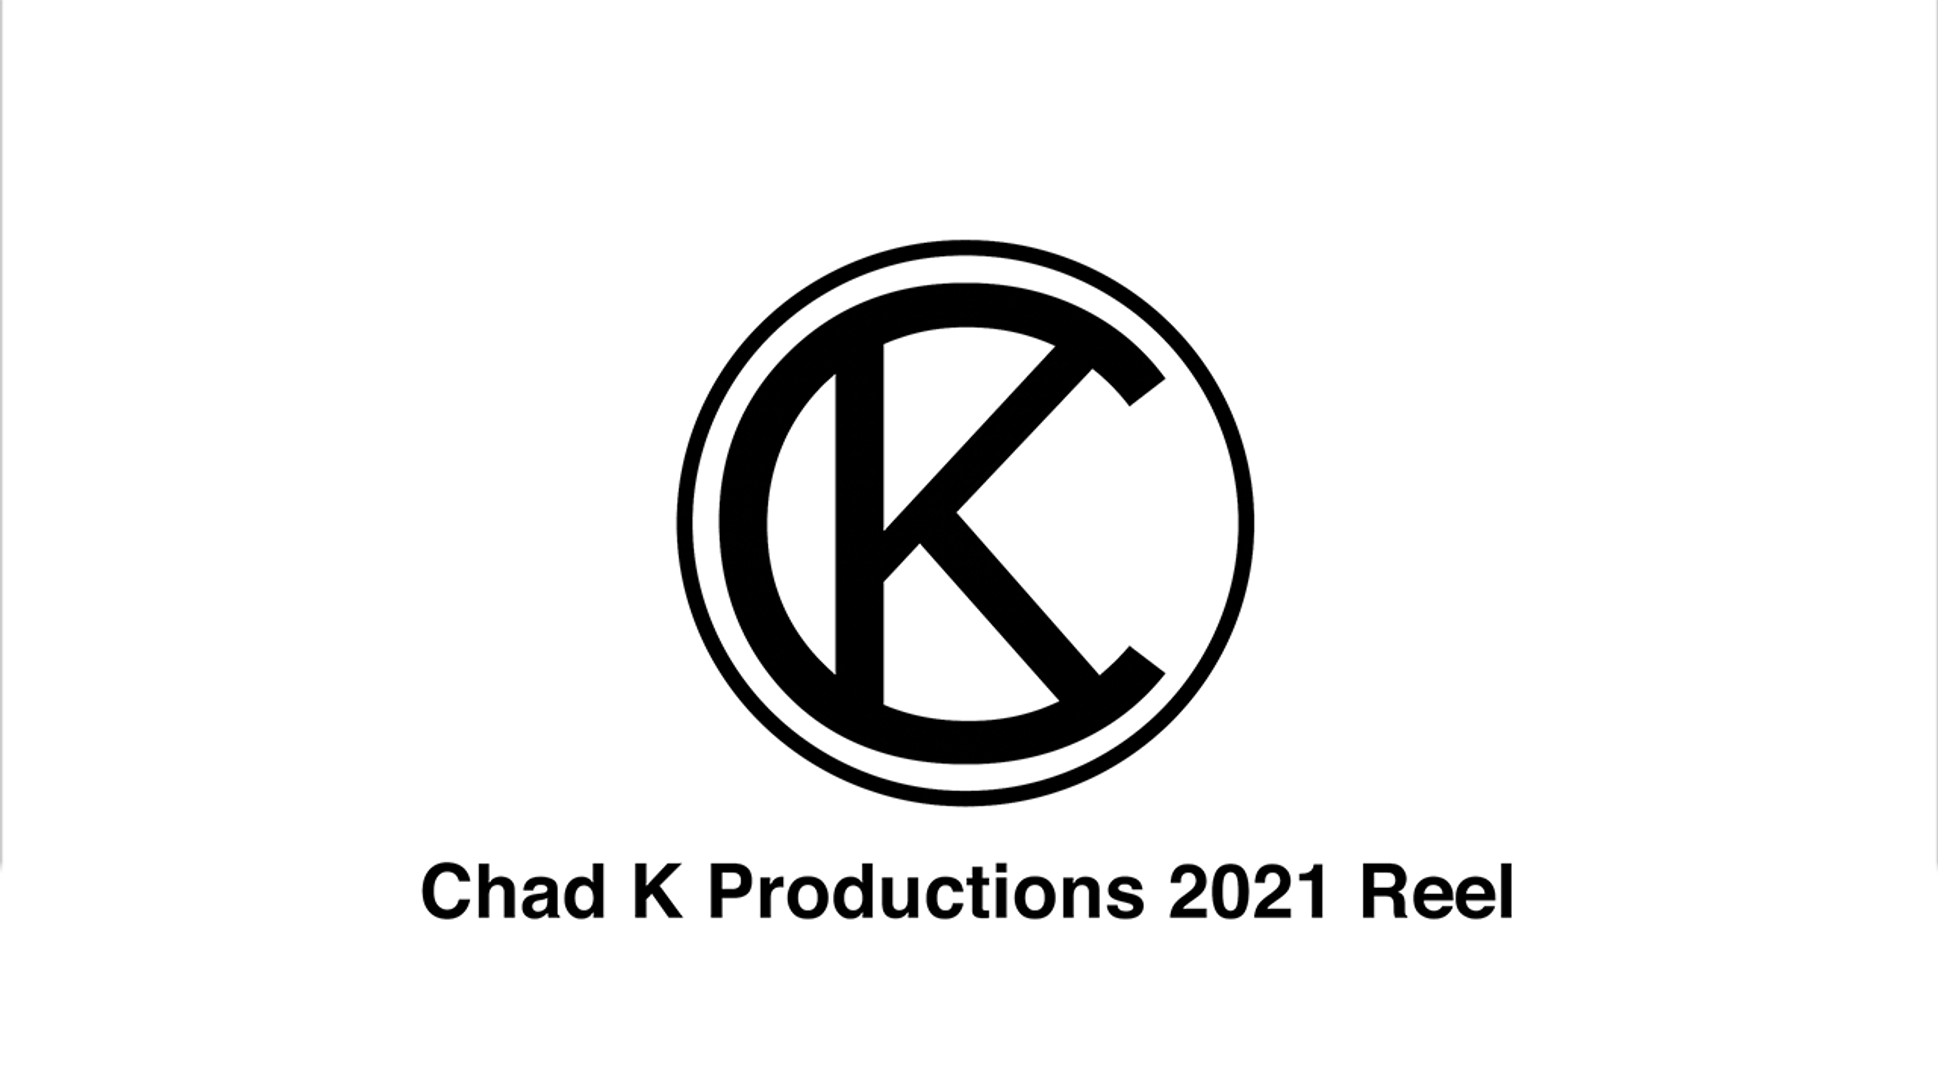 Chad K Productions 2021 Reel